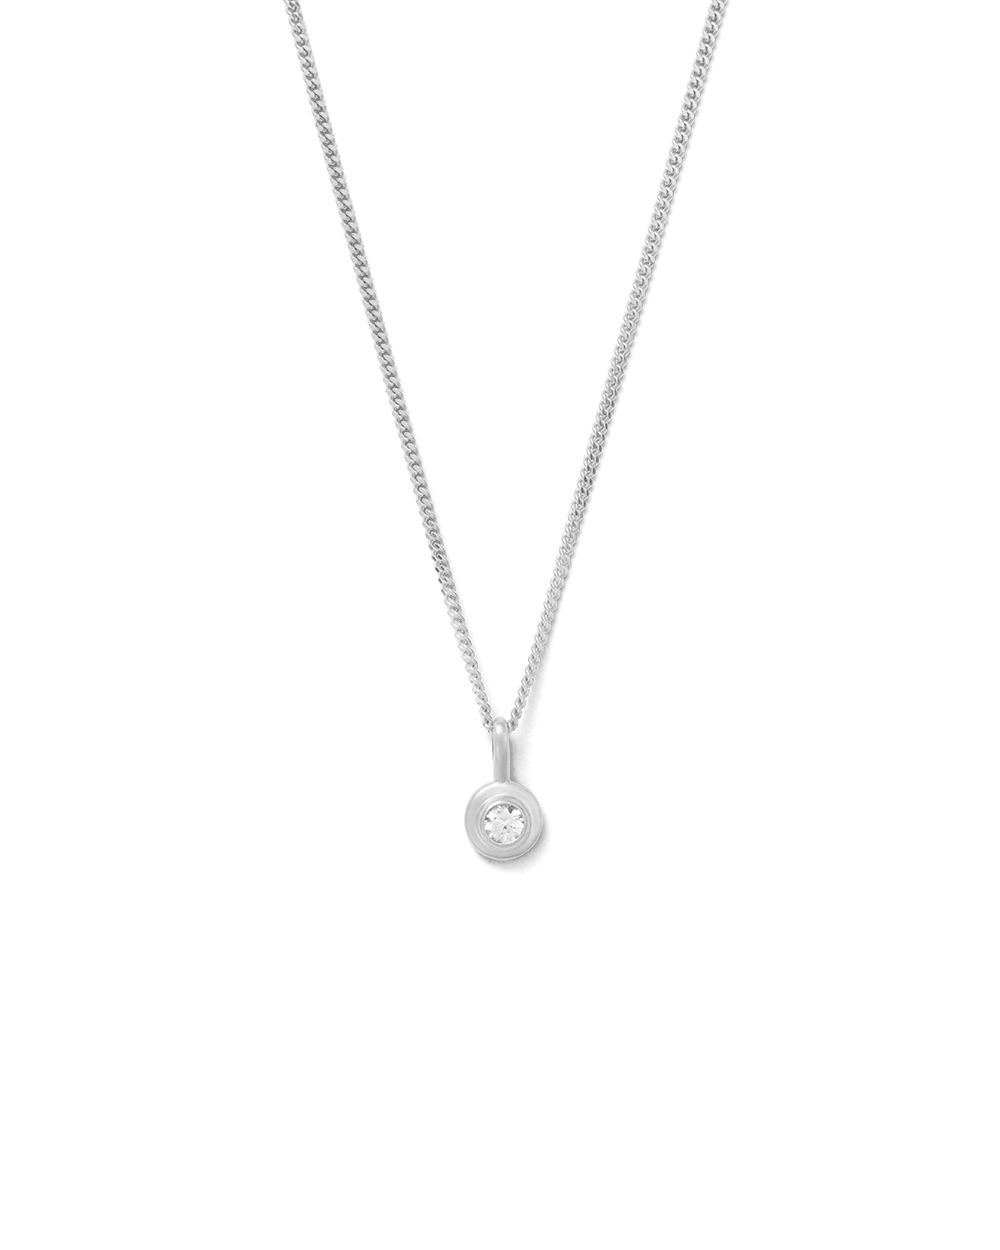 BIRTHSTONE NECKLACE (STERLING SILVER) – KIRSTIN ASH (New Zealand)